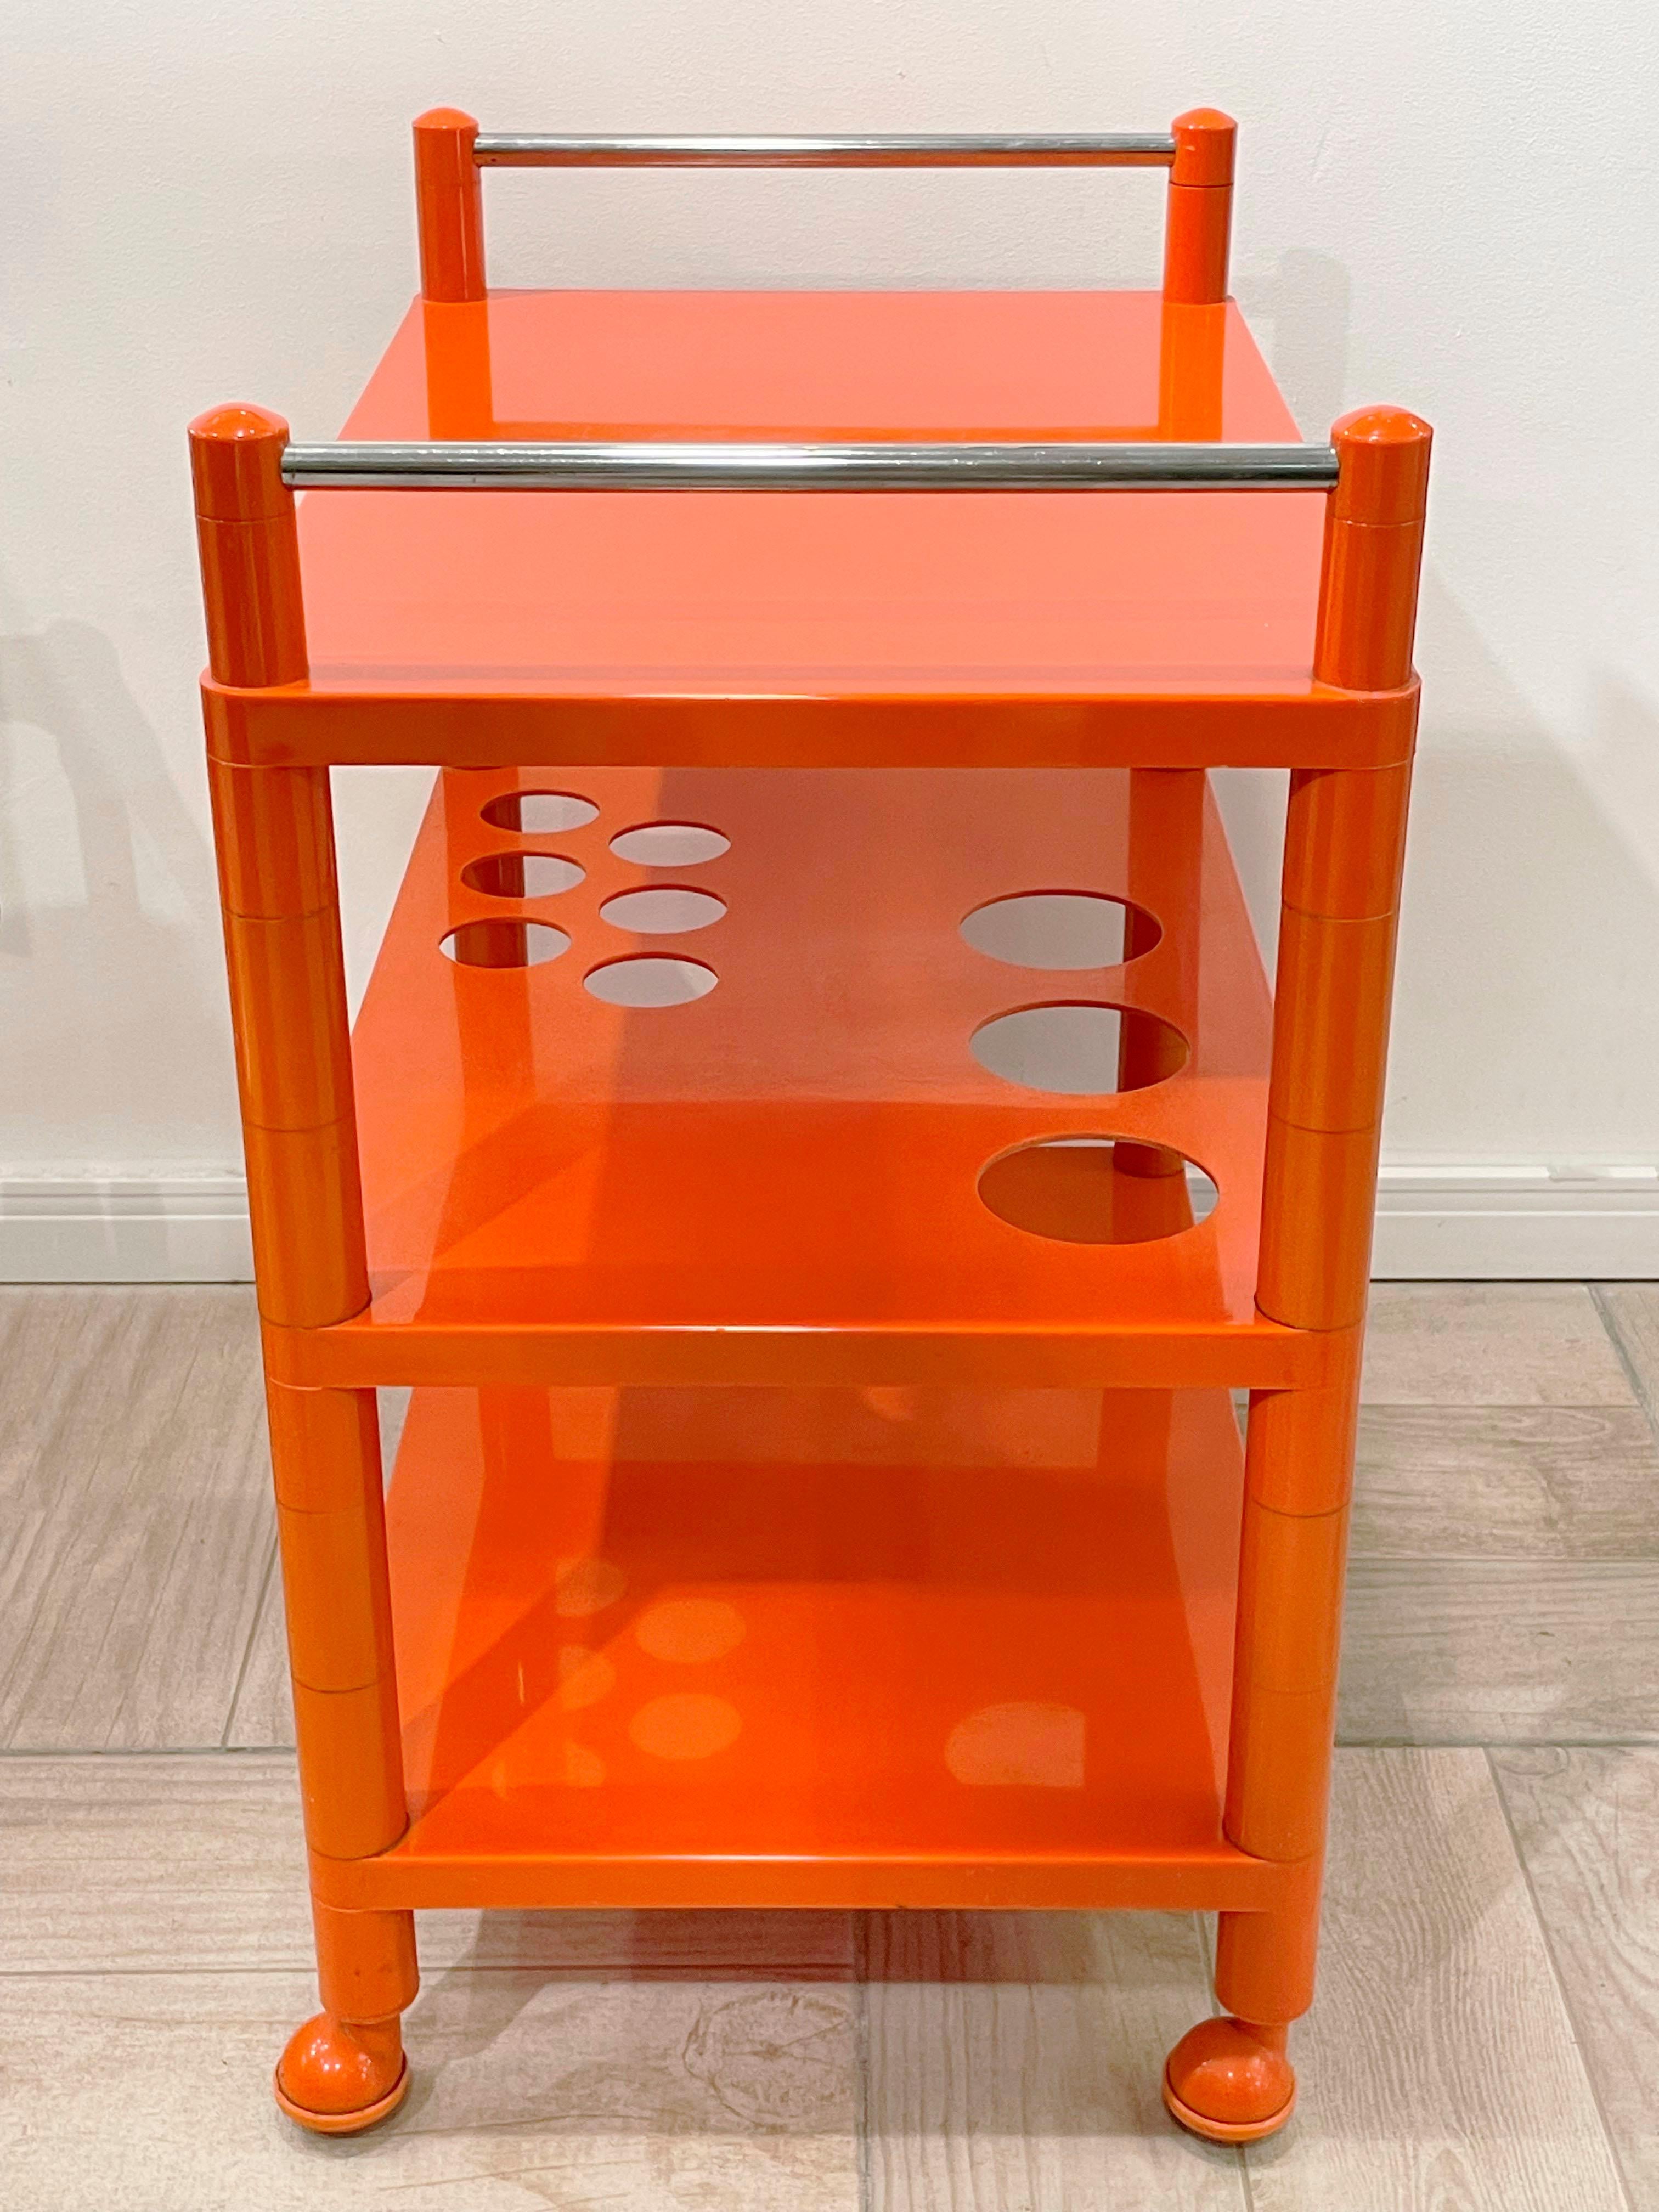 Vintage Orange bar trolley Style Alberto Rosselli for Kartell, 1970s
Fun and versatile beverage cart or bar cart in the style of Alberto Roselli for Kartell. Probably from the '70s, this 